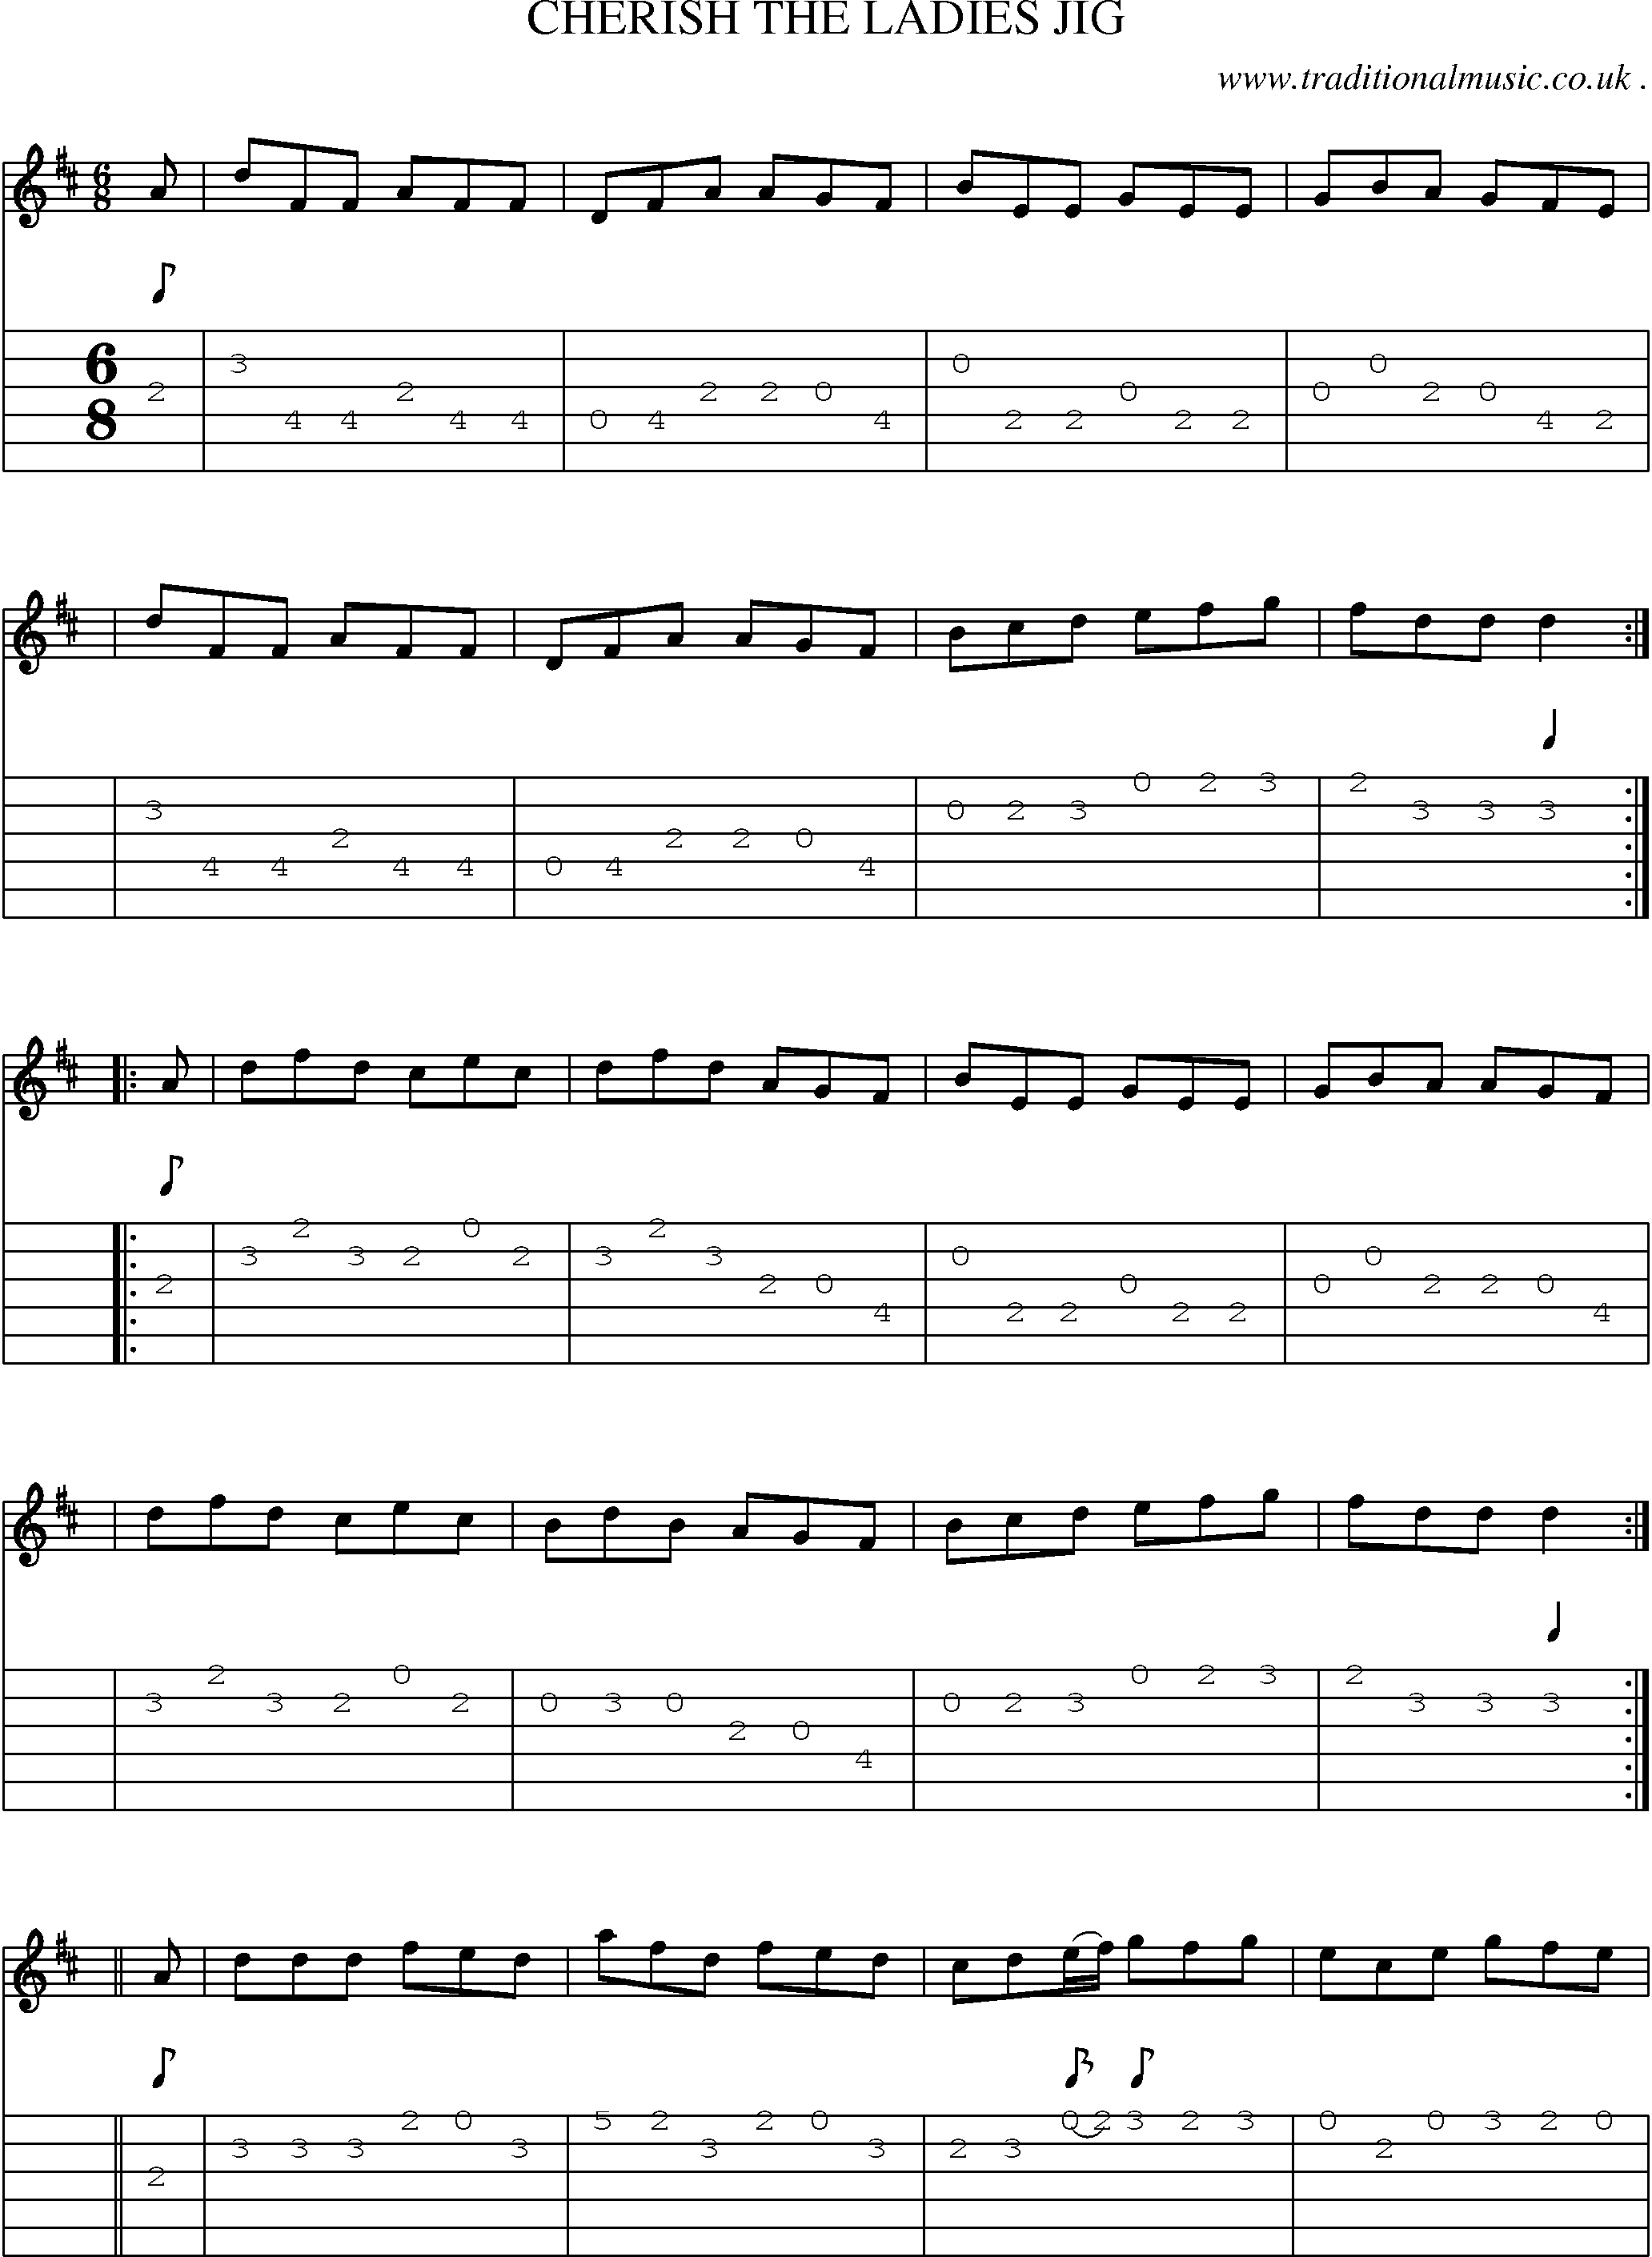 Sheet-Music and Guitar Tabs for Cherish The Ladies Jig